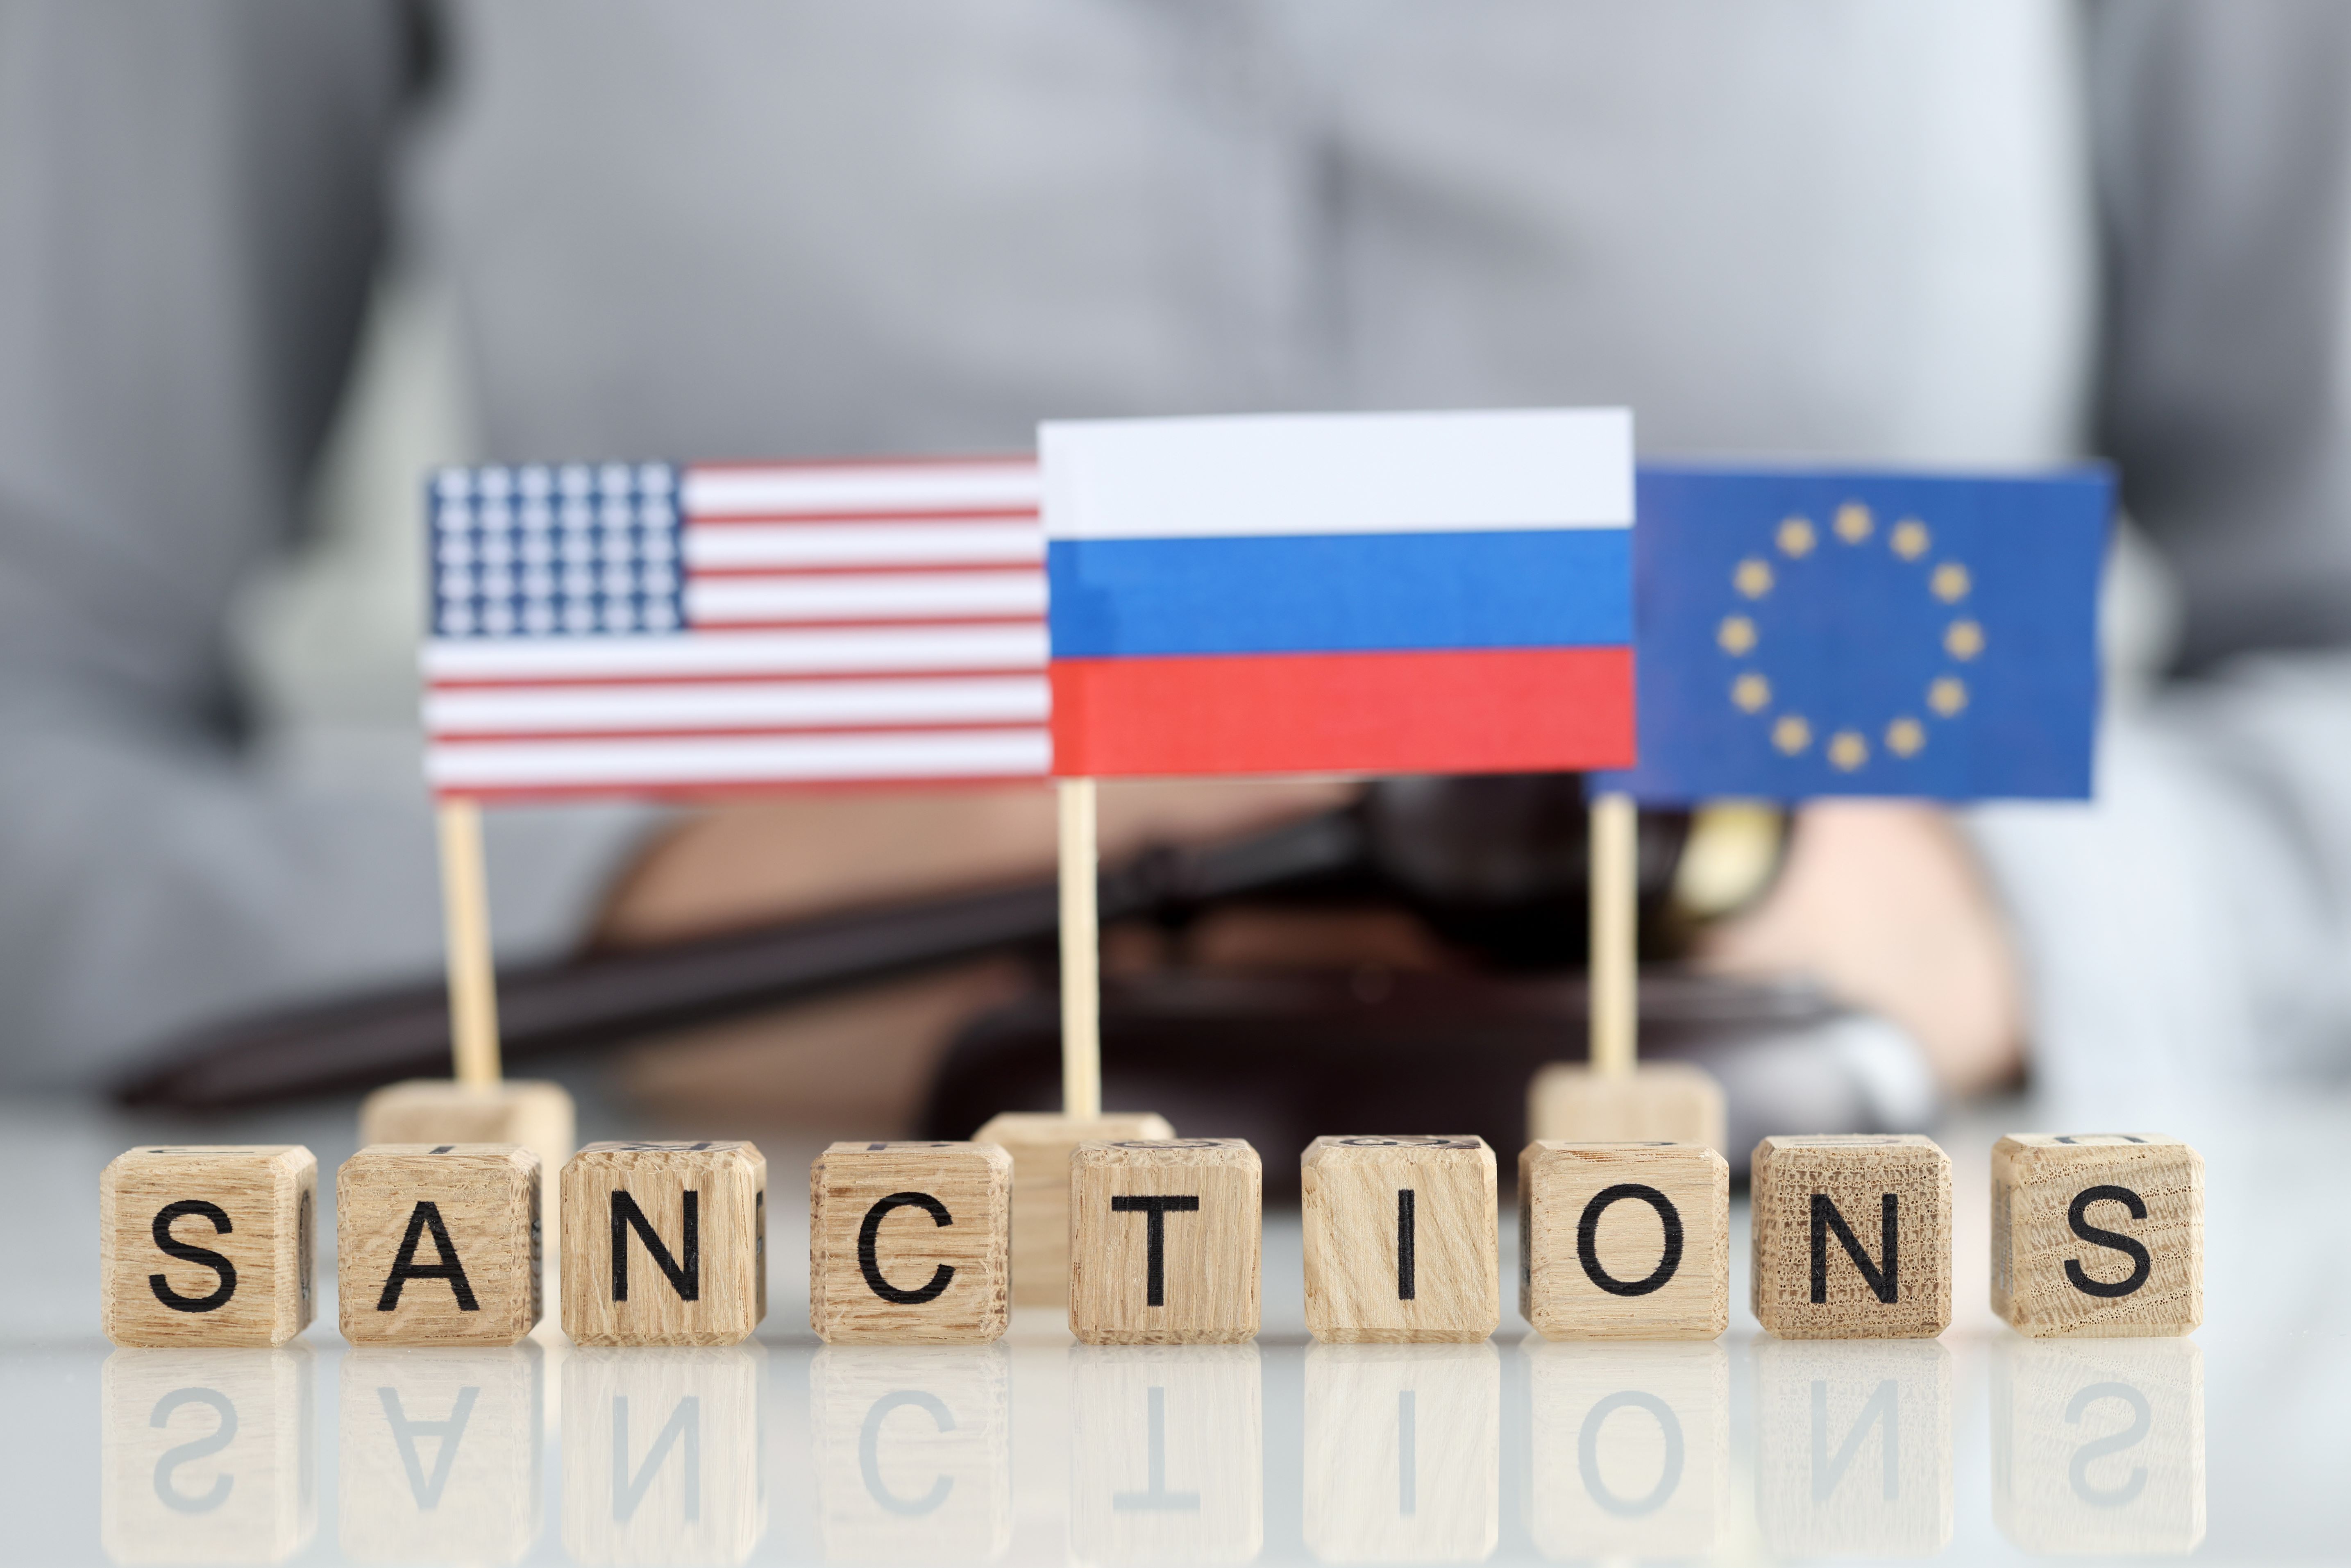 Sanction below flags: US, Russia and EU